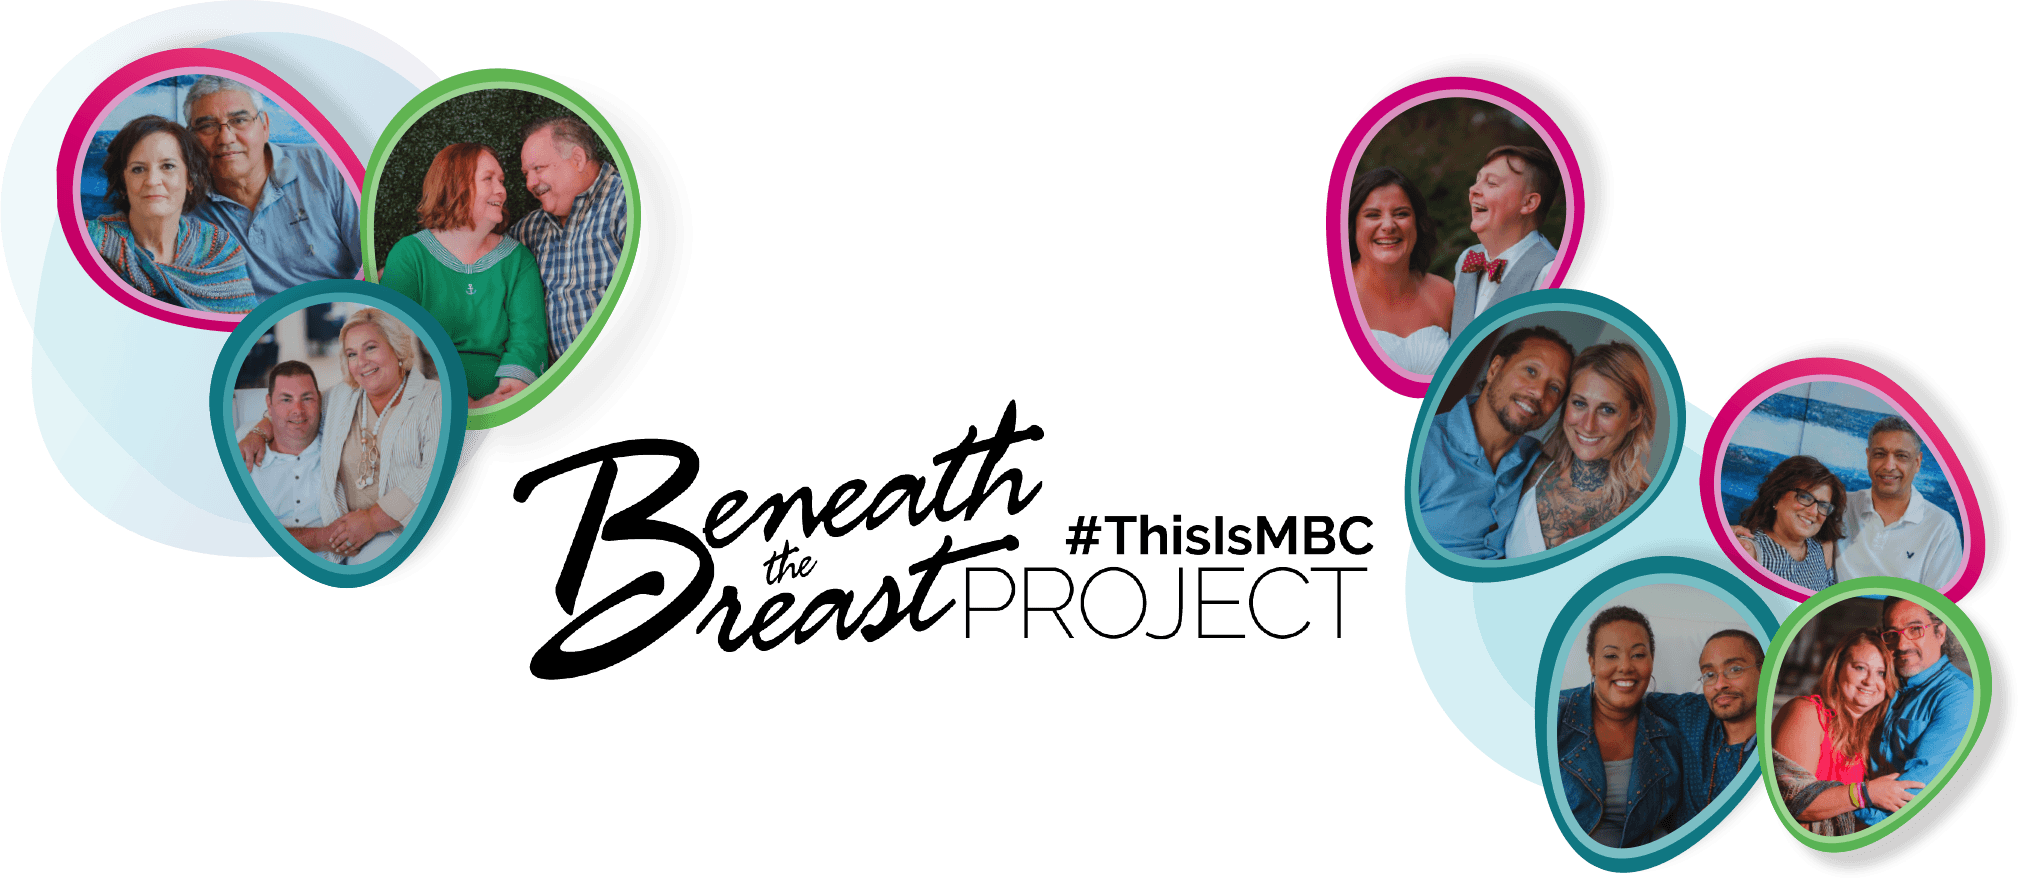 Beneath the Breast Project